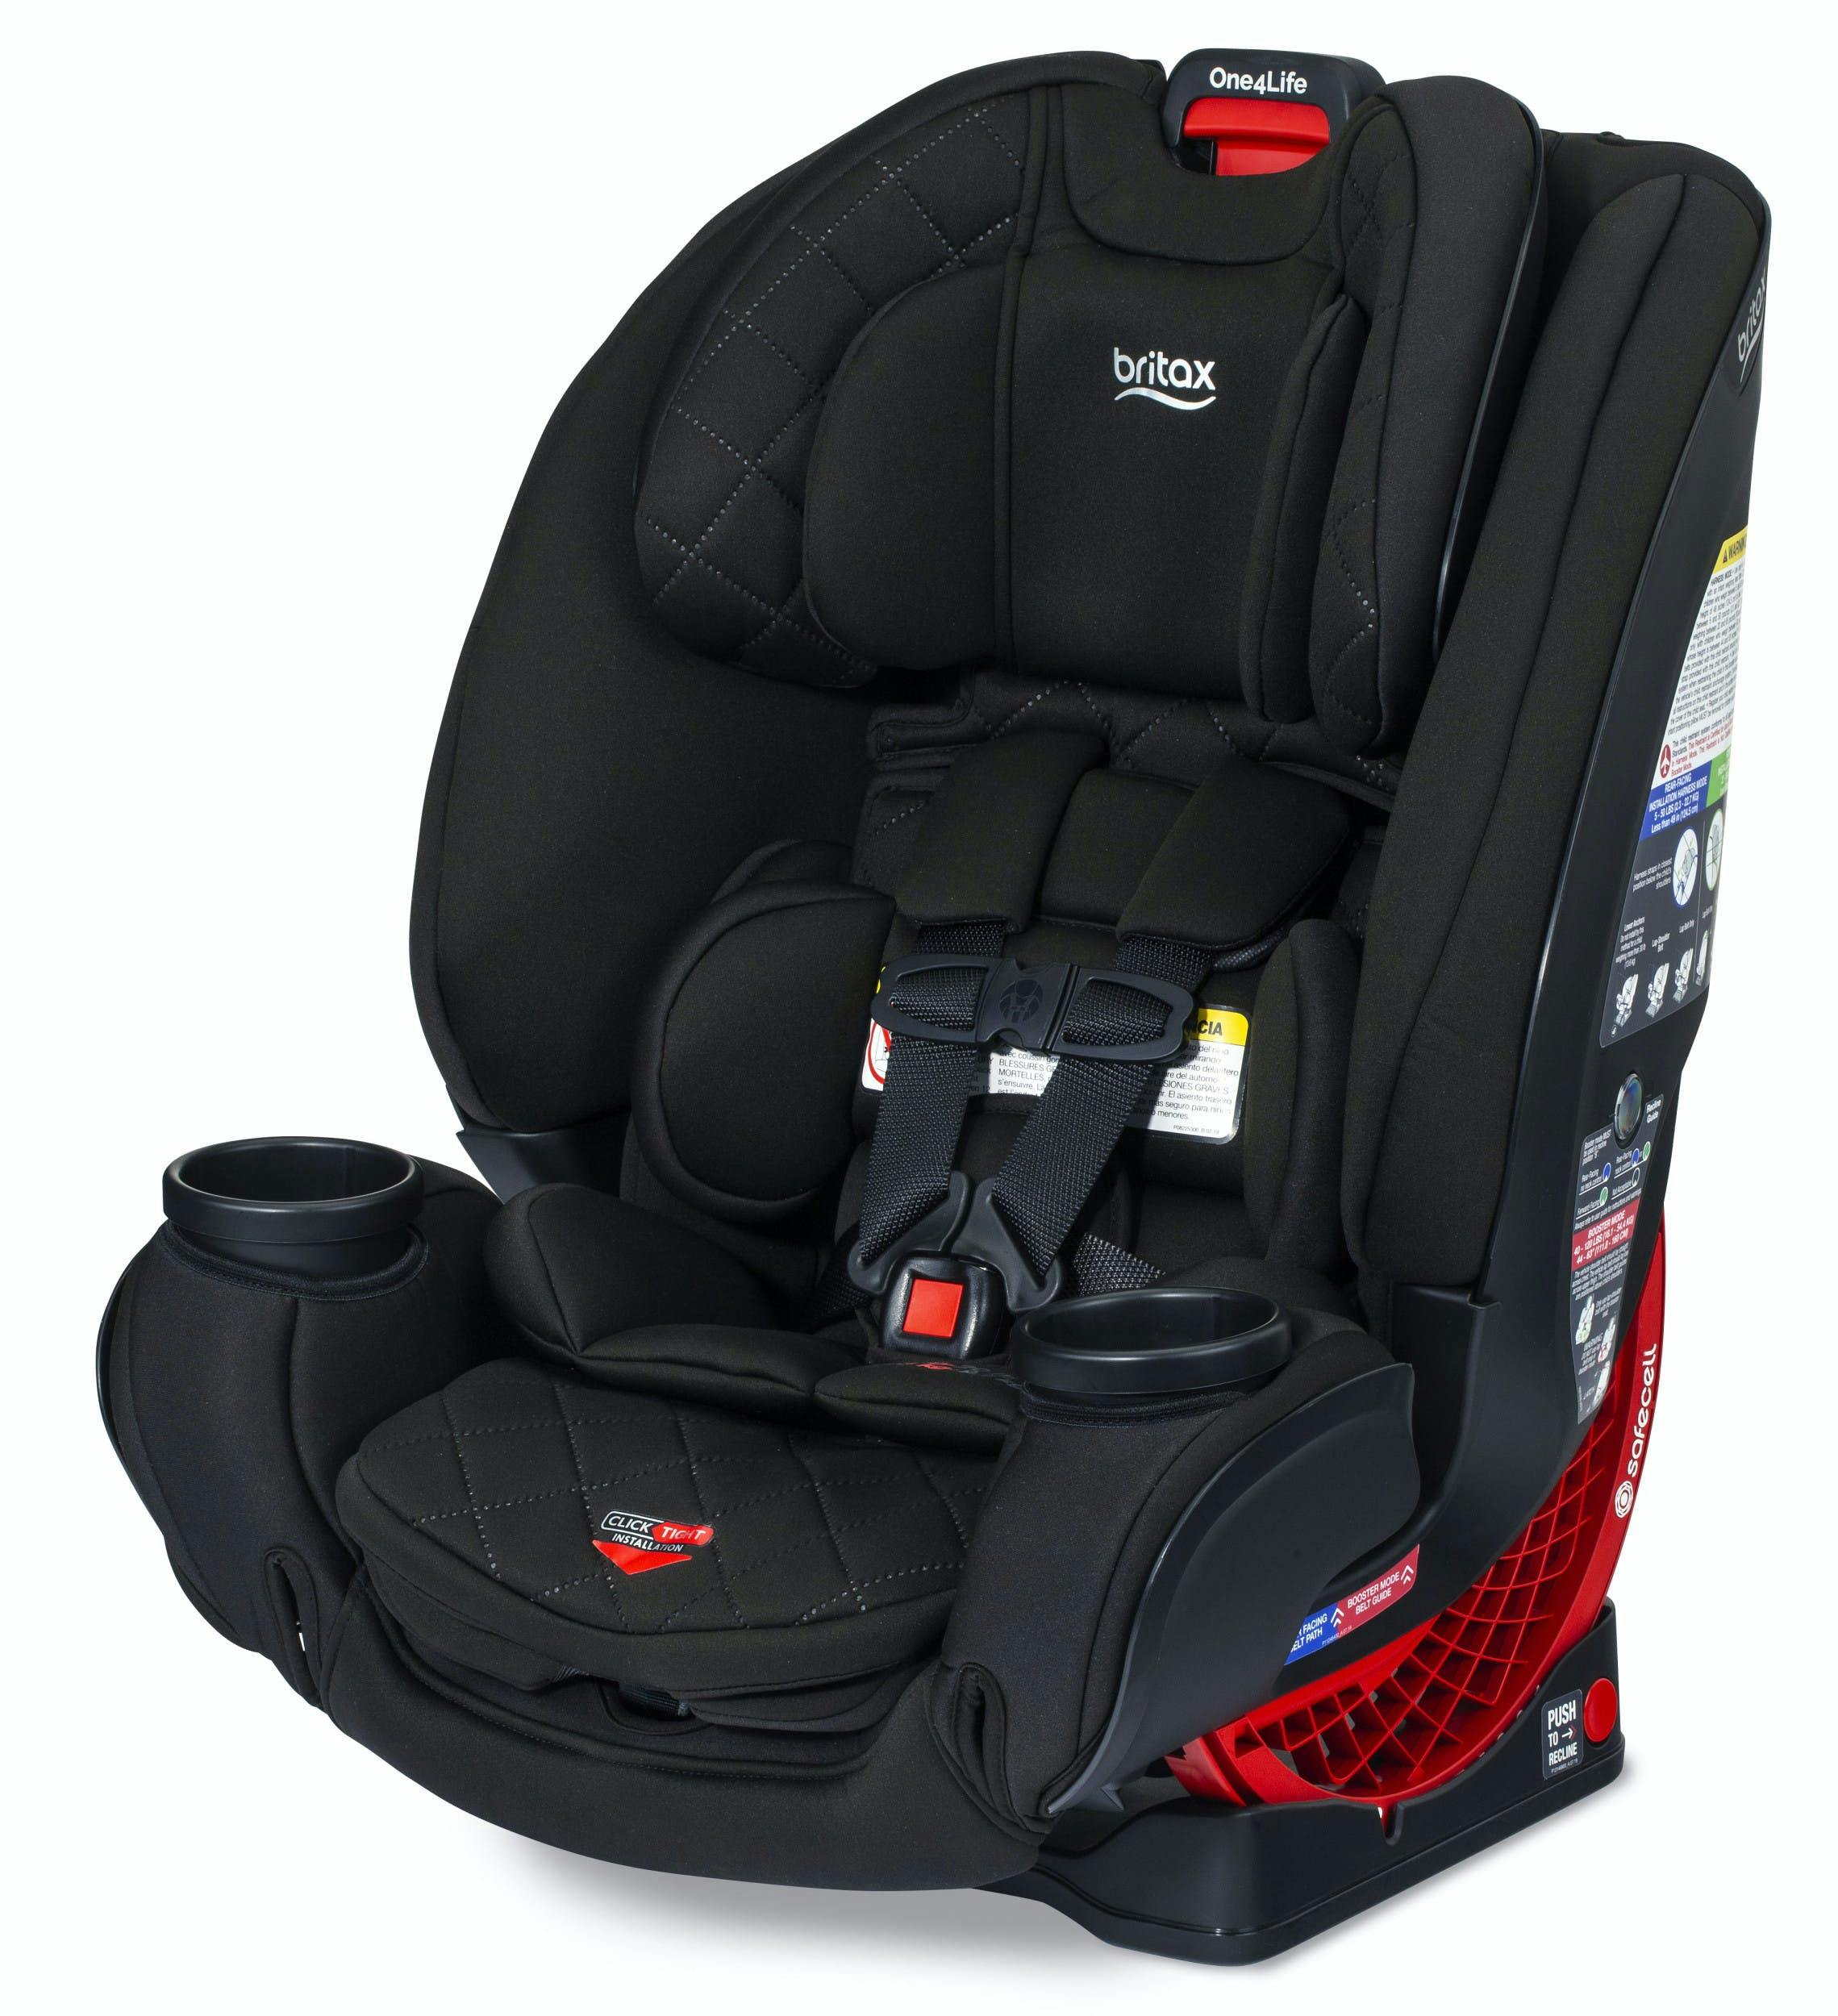 Britax One4Life ClickTight All-in-One Convertible Car Seat + Booster